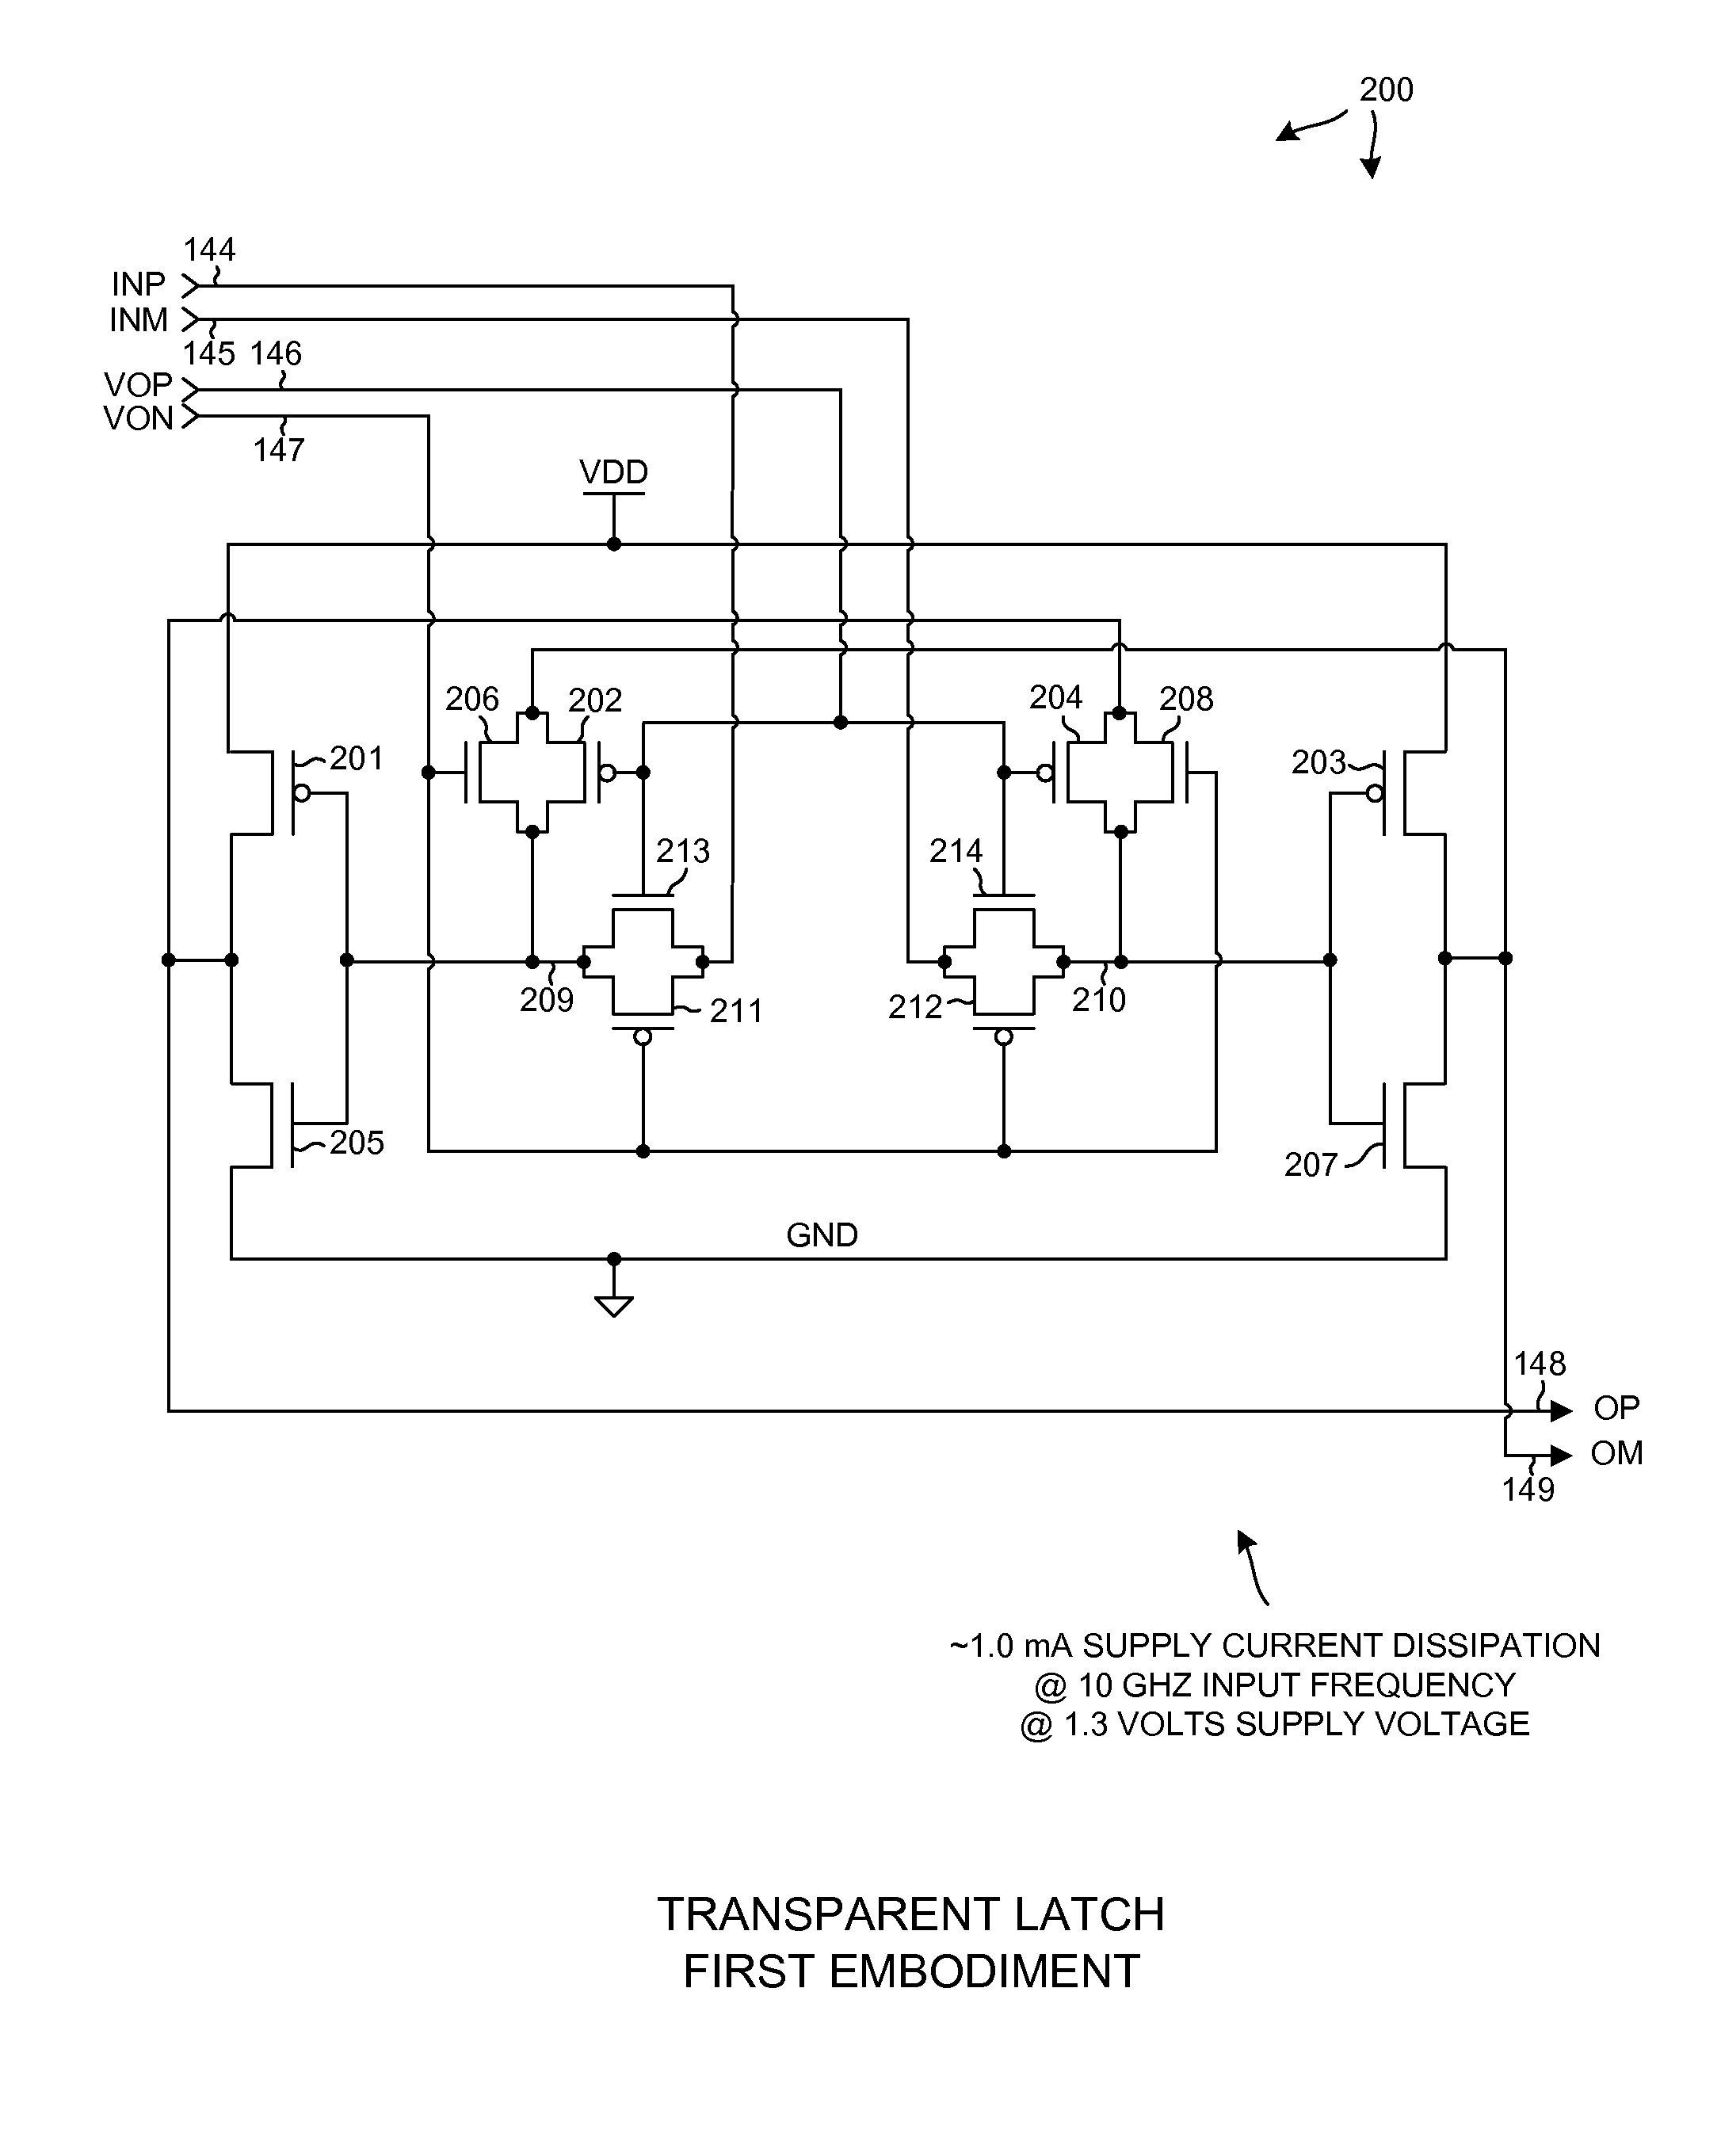 Low power complementary logic latch and RF divider